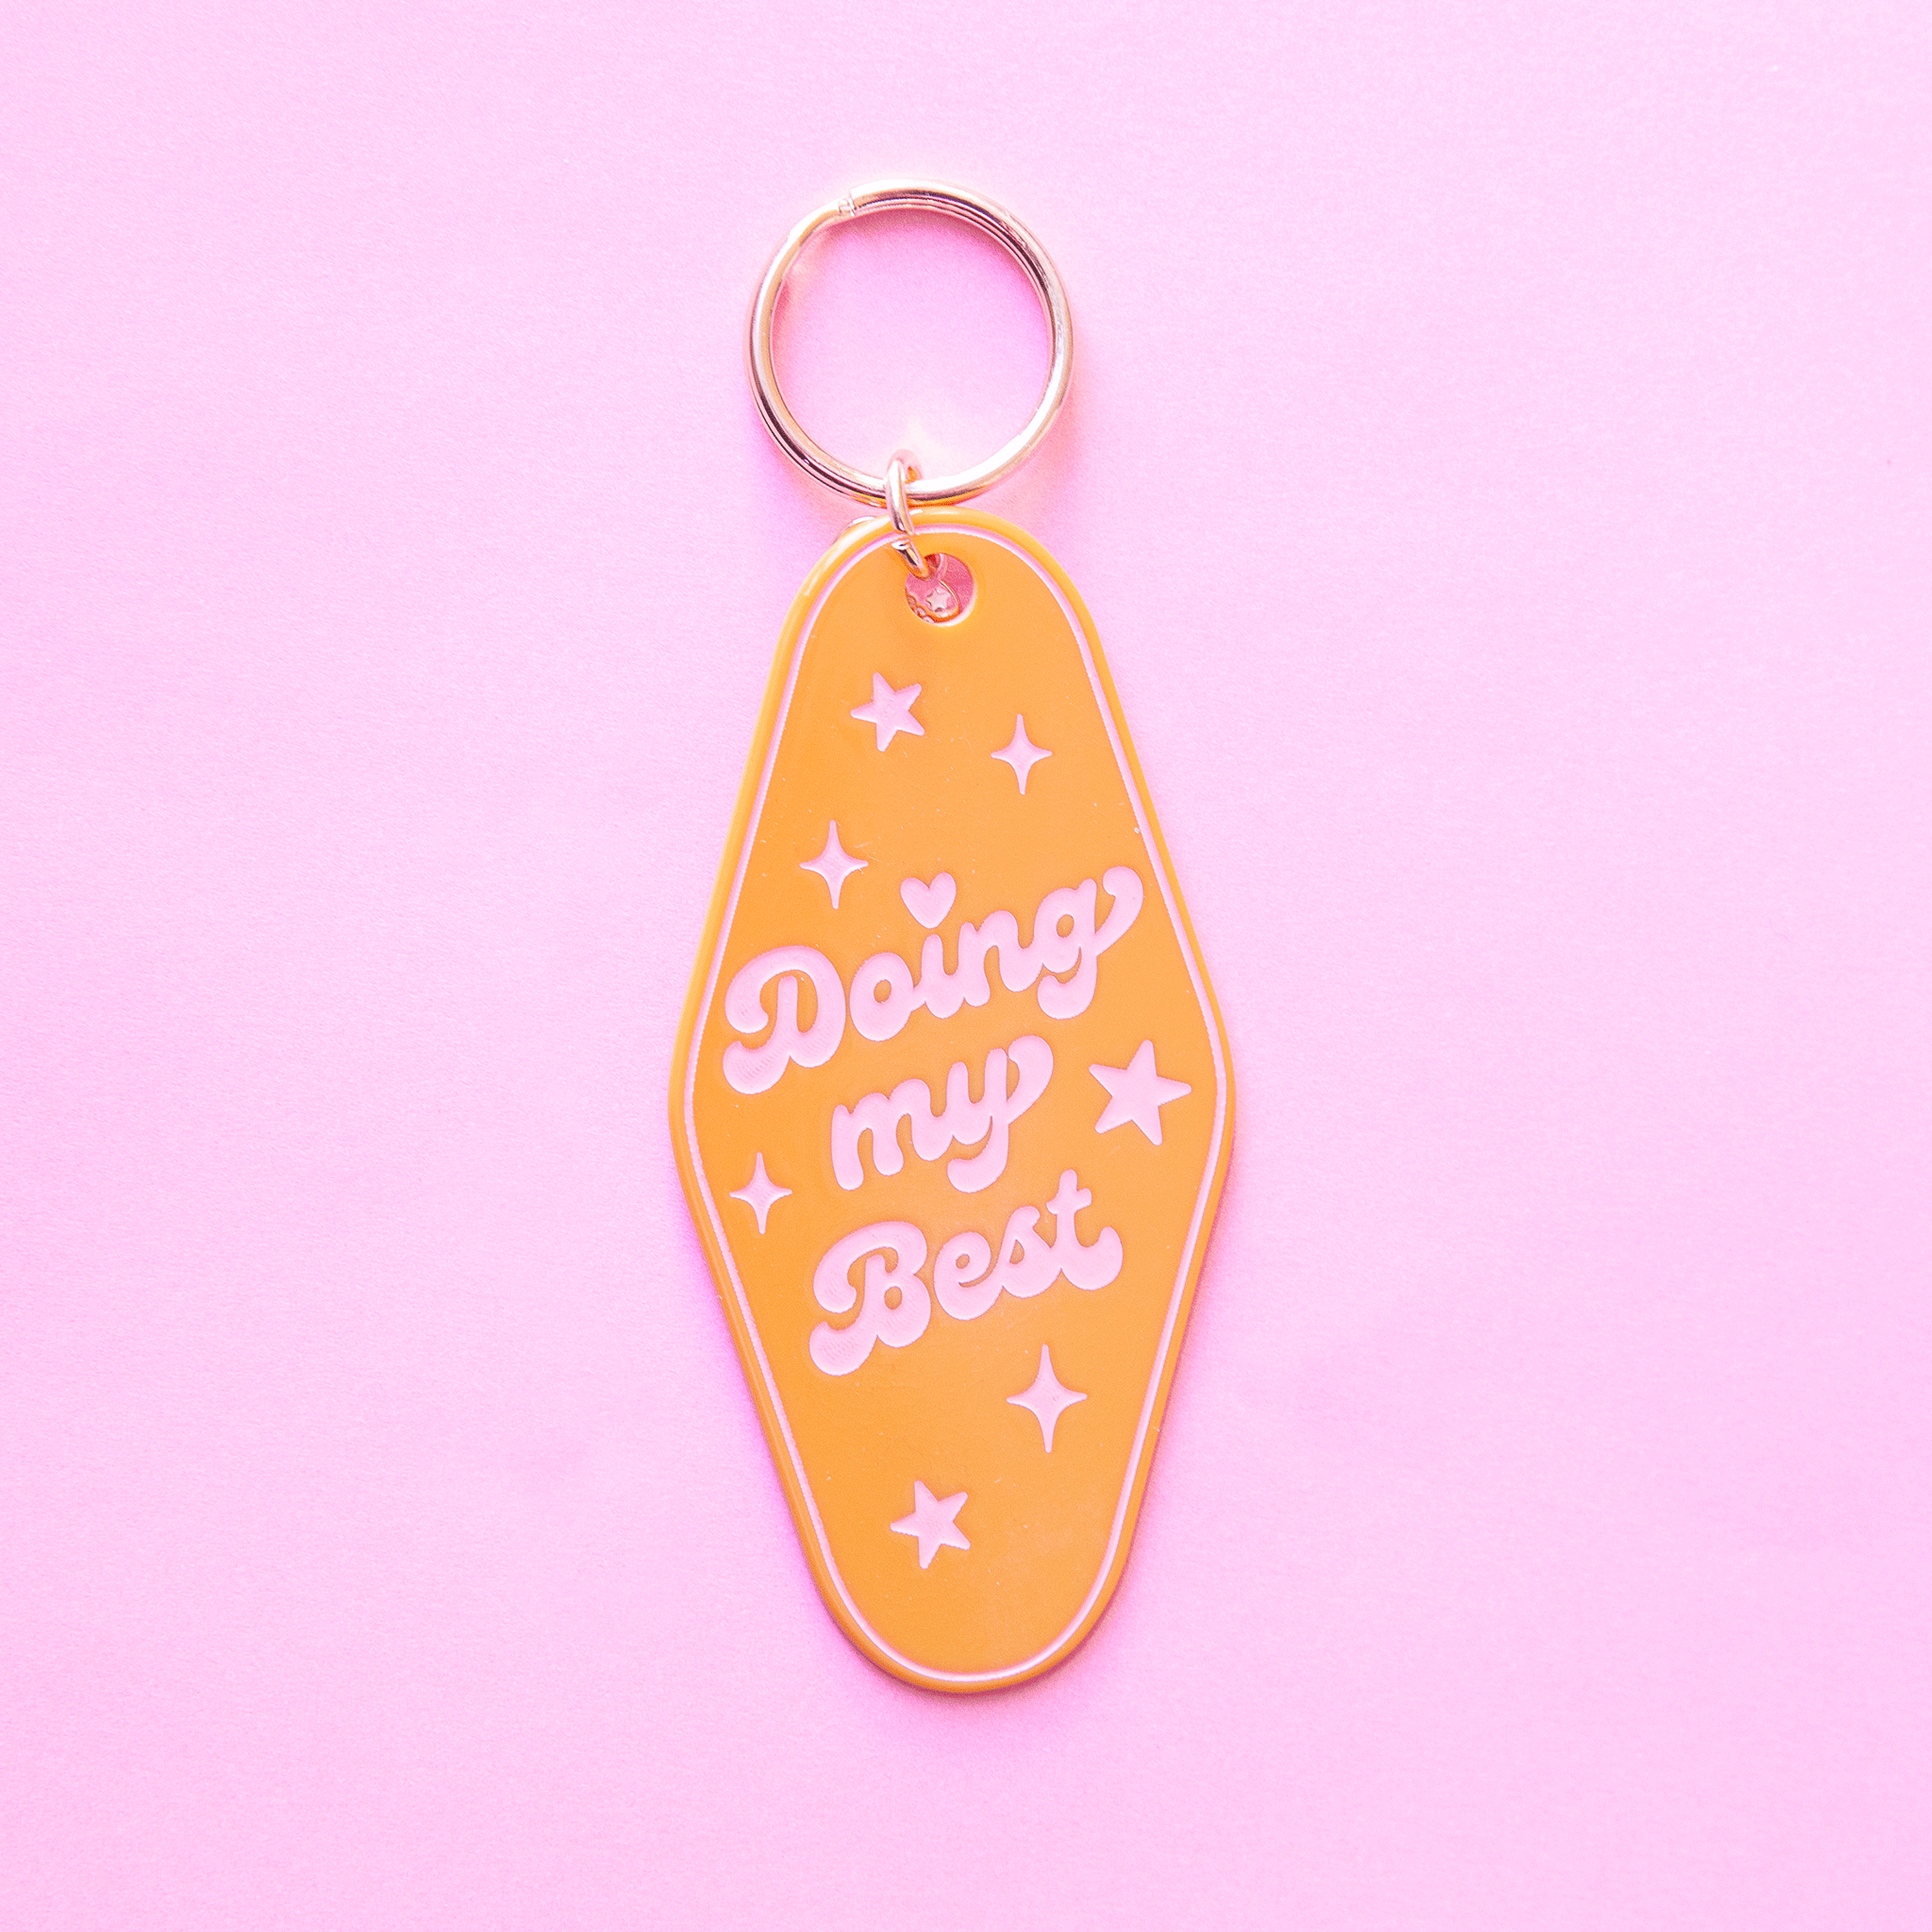 On a purple background is a mustard yellow diamond shaped keychain with a gold loop and pink text that reads, "Doing my Best" surrounded by star shapes and sparkles. 